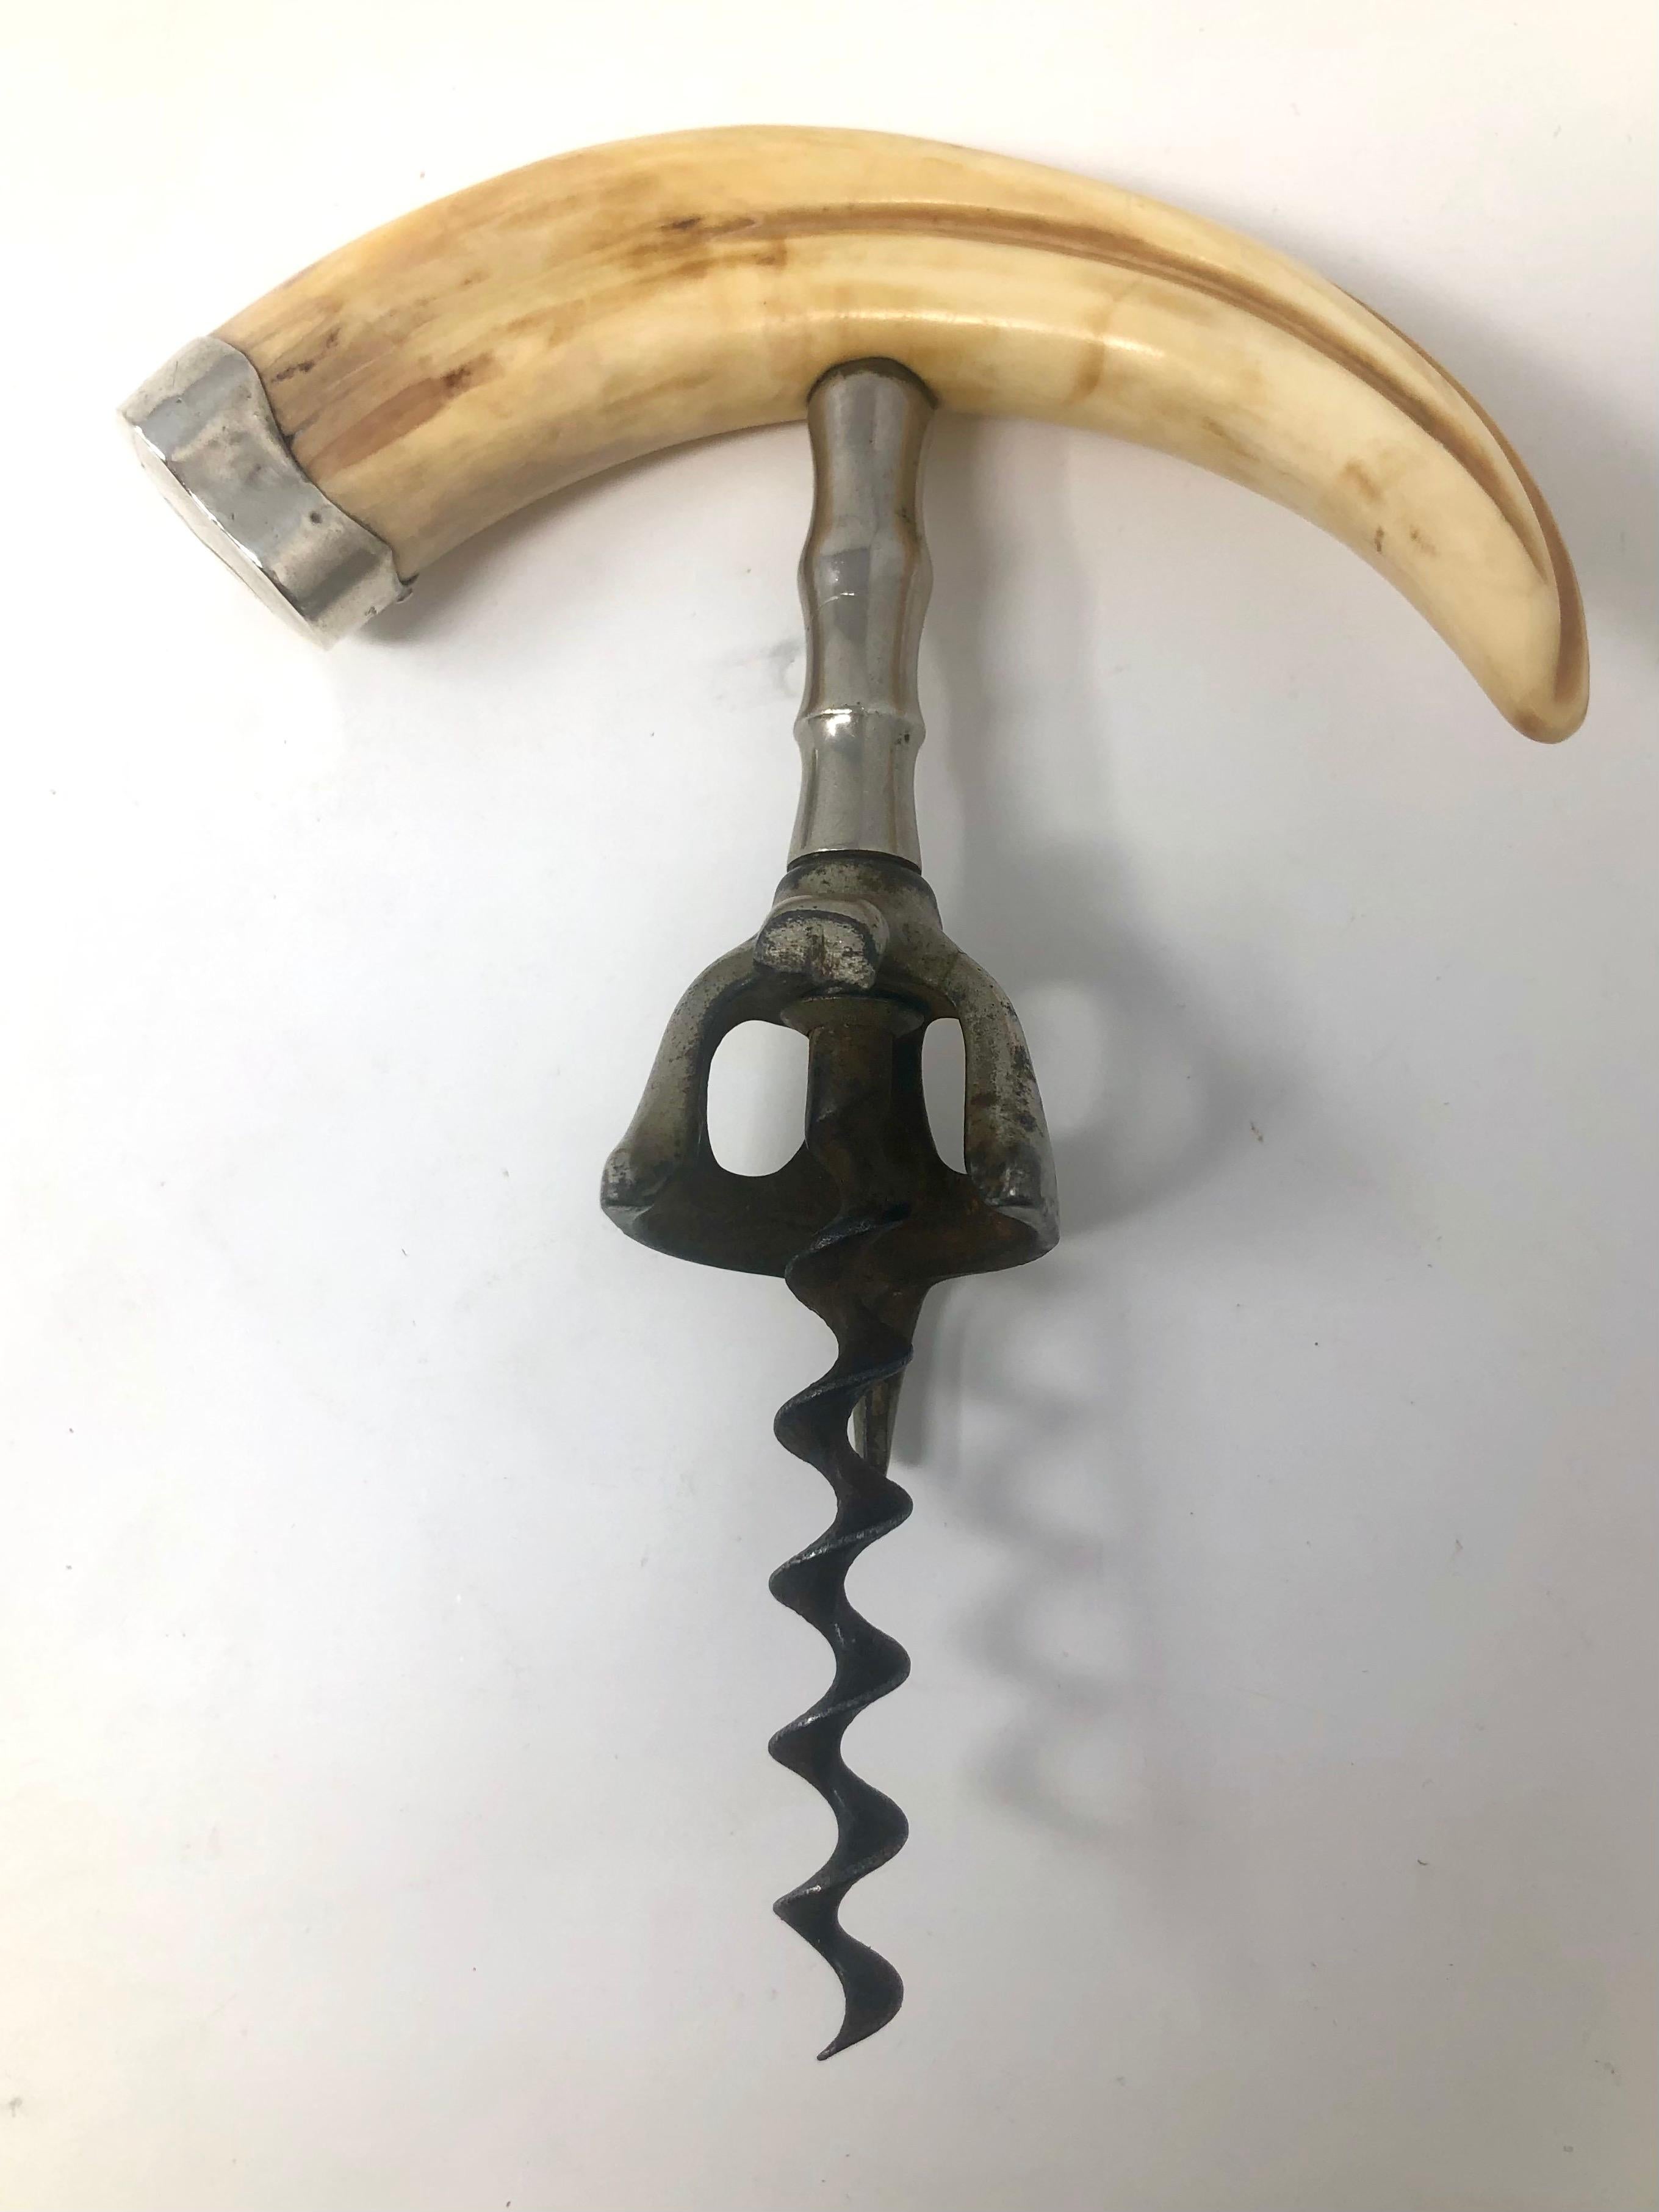 Antique sterling silver mounted boar's tusk corkscrew with steel blade, circa 1920.